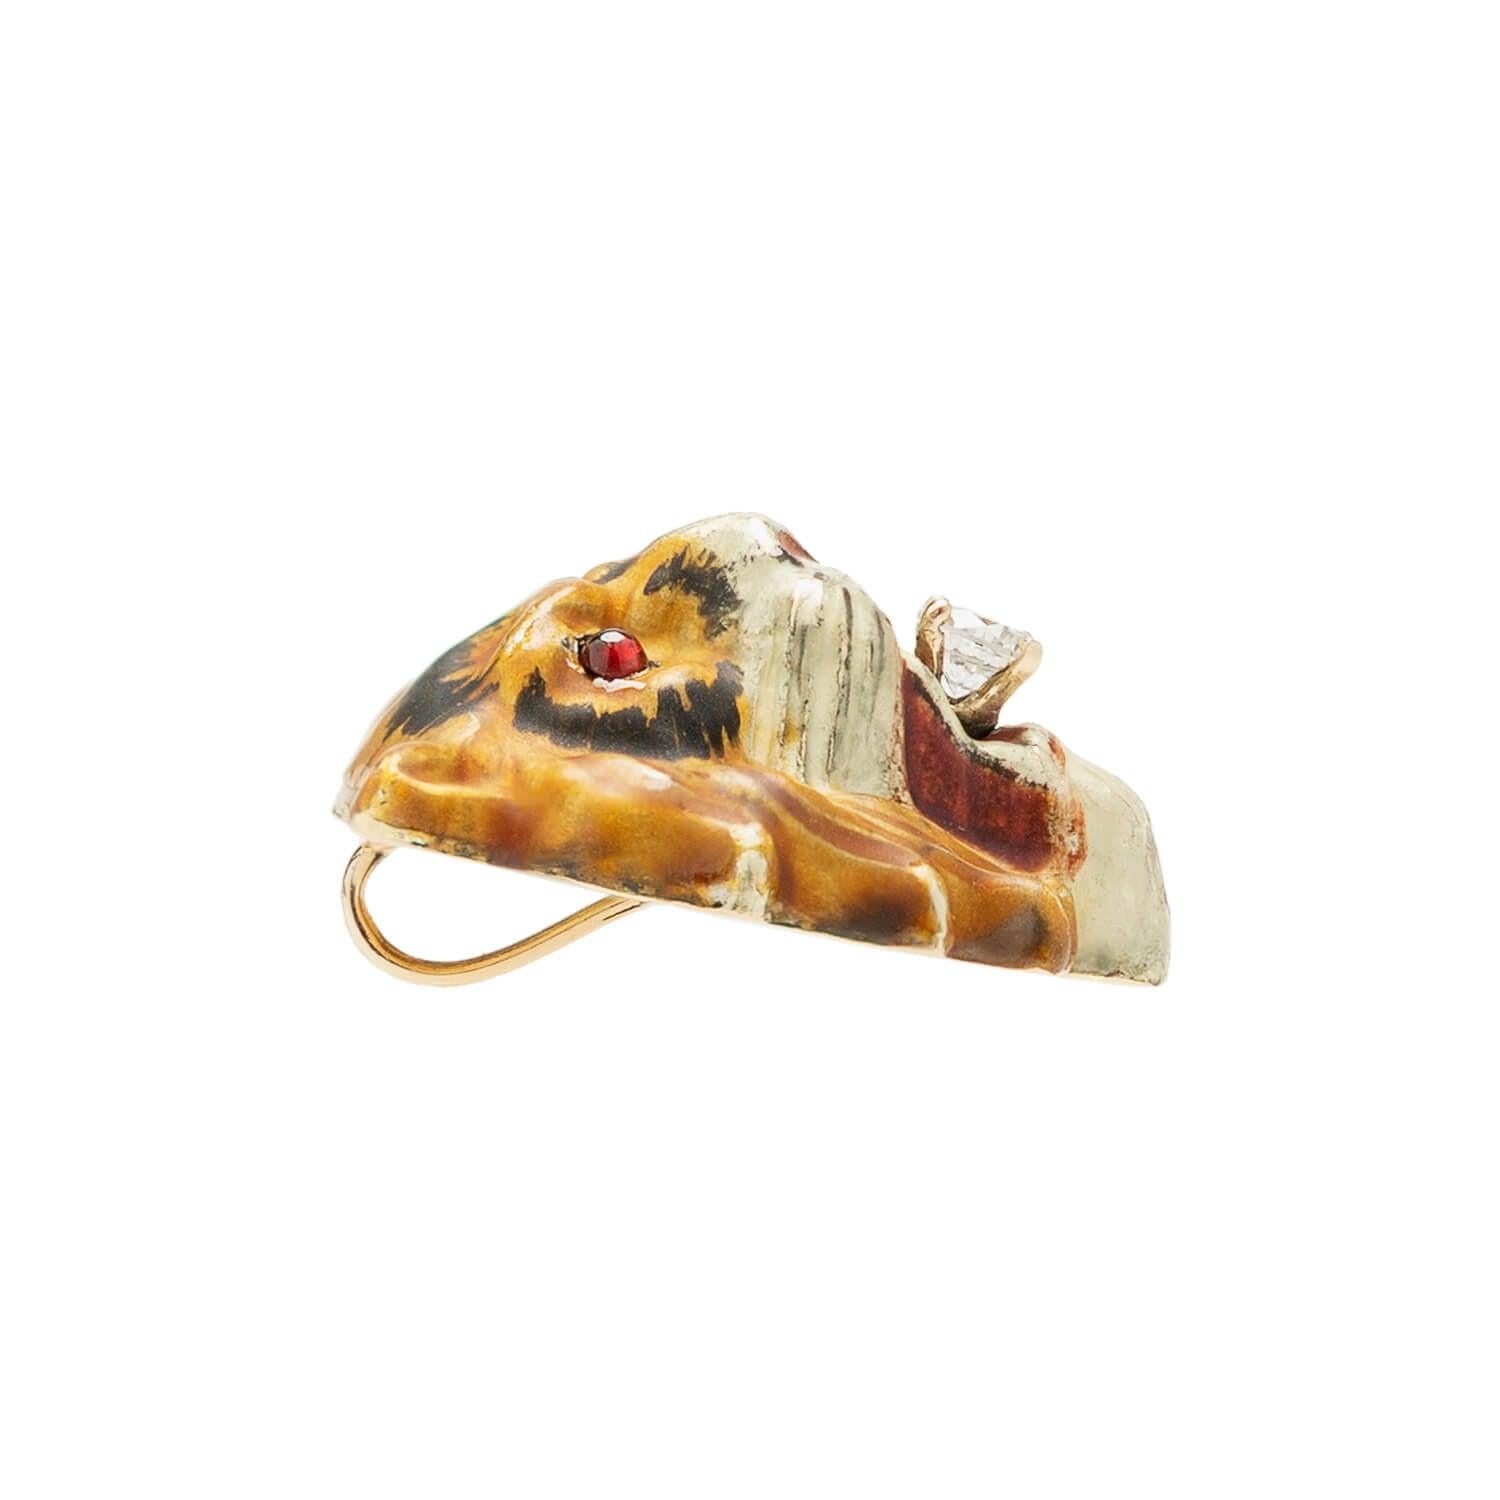 A magnificent enameled pendant from the Victorian (ca1880) era! Crafted in rosy 14k gold, the piece represents the 3-dimensional repousse face of a fierce, snarling tiger. Luscious hand-painted enamel accents cover the surface, creating an